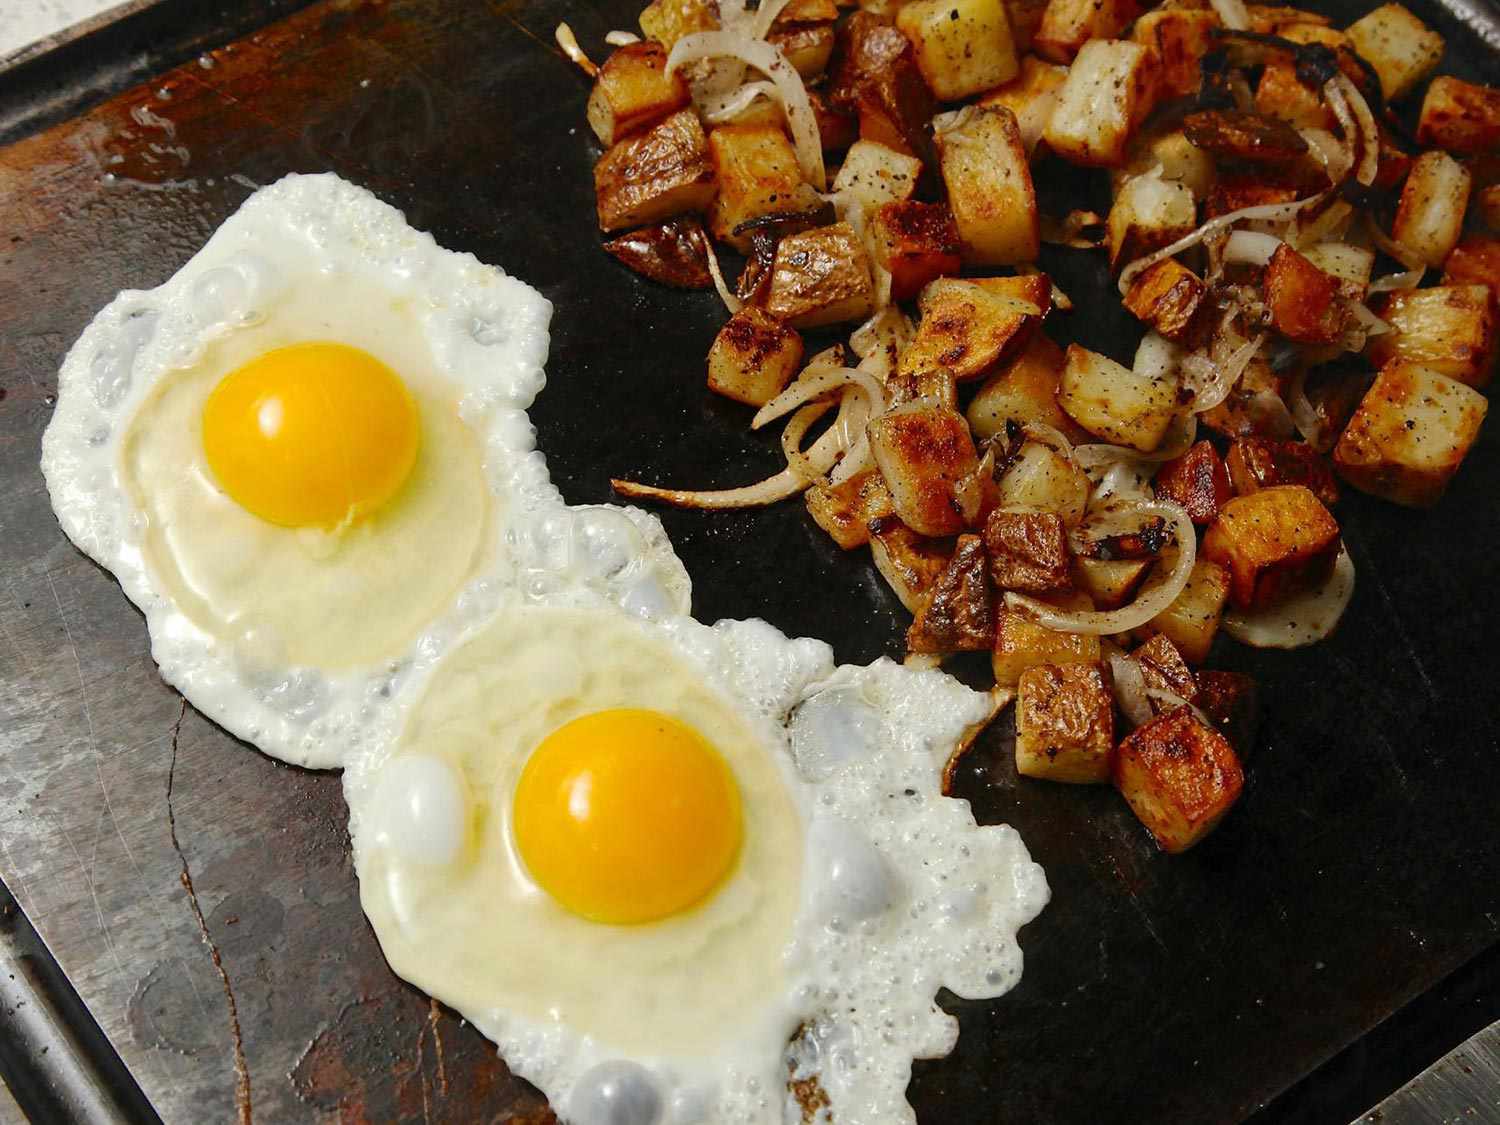 Eggs and hash on the baking steel griddle